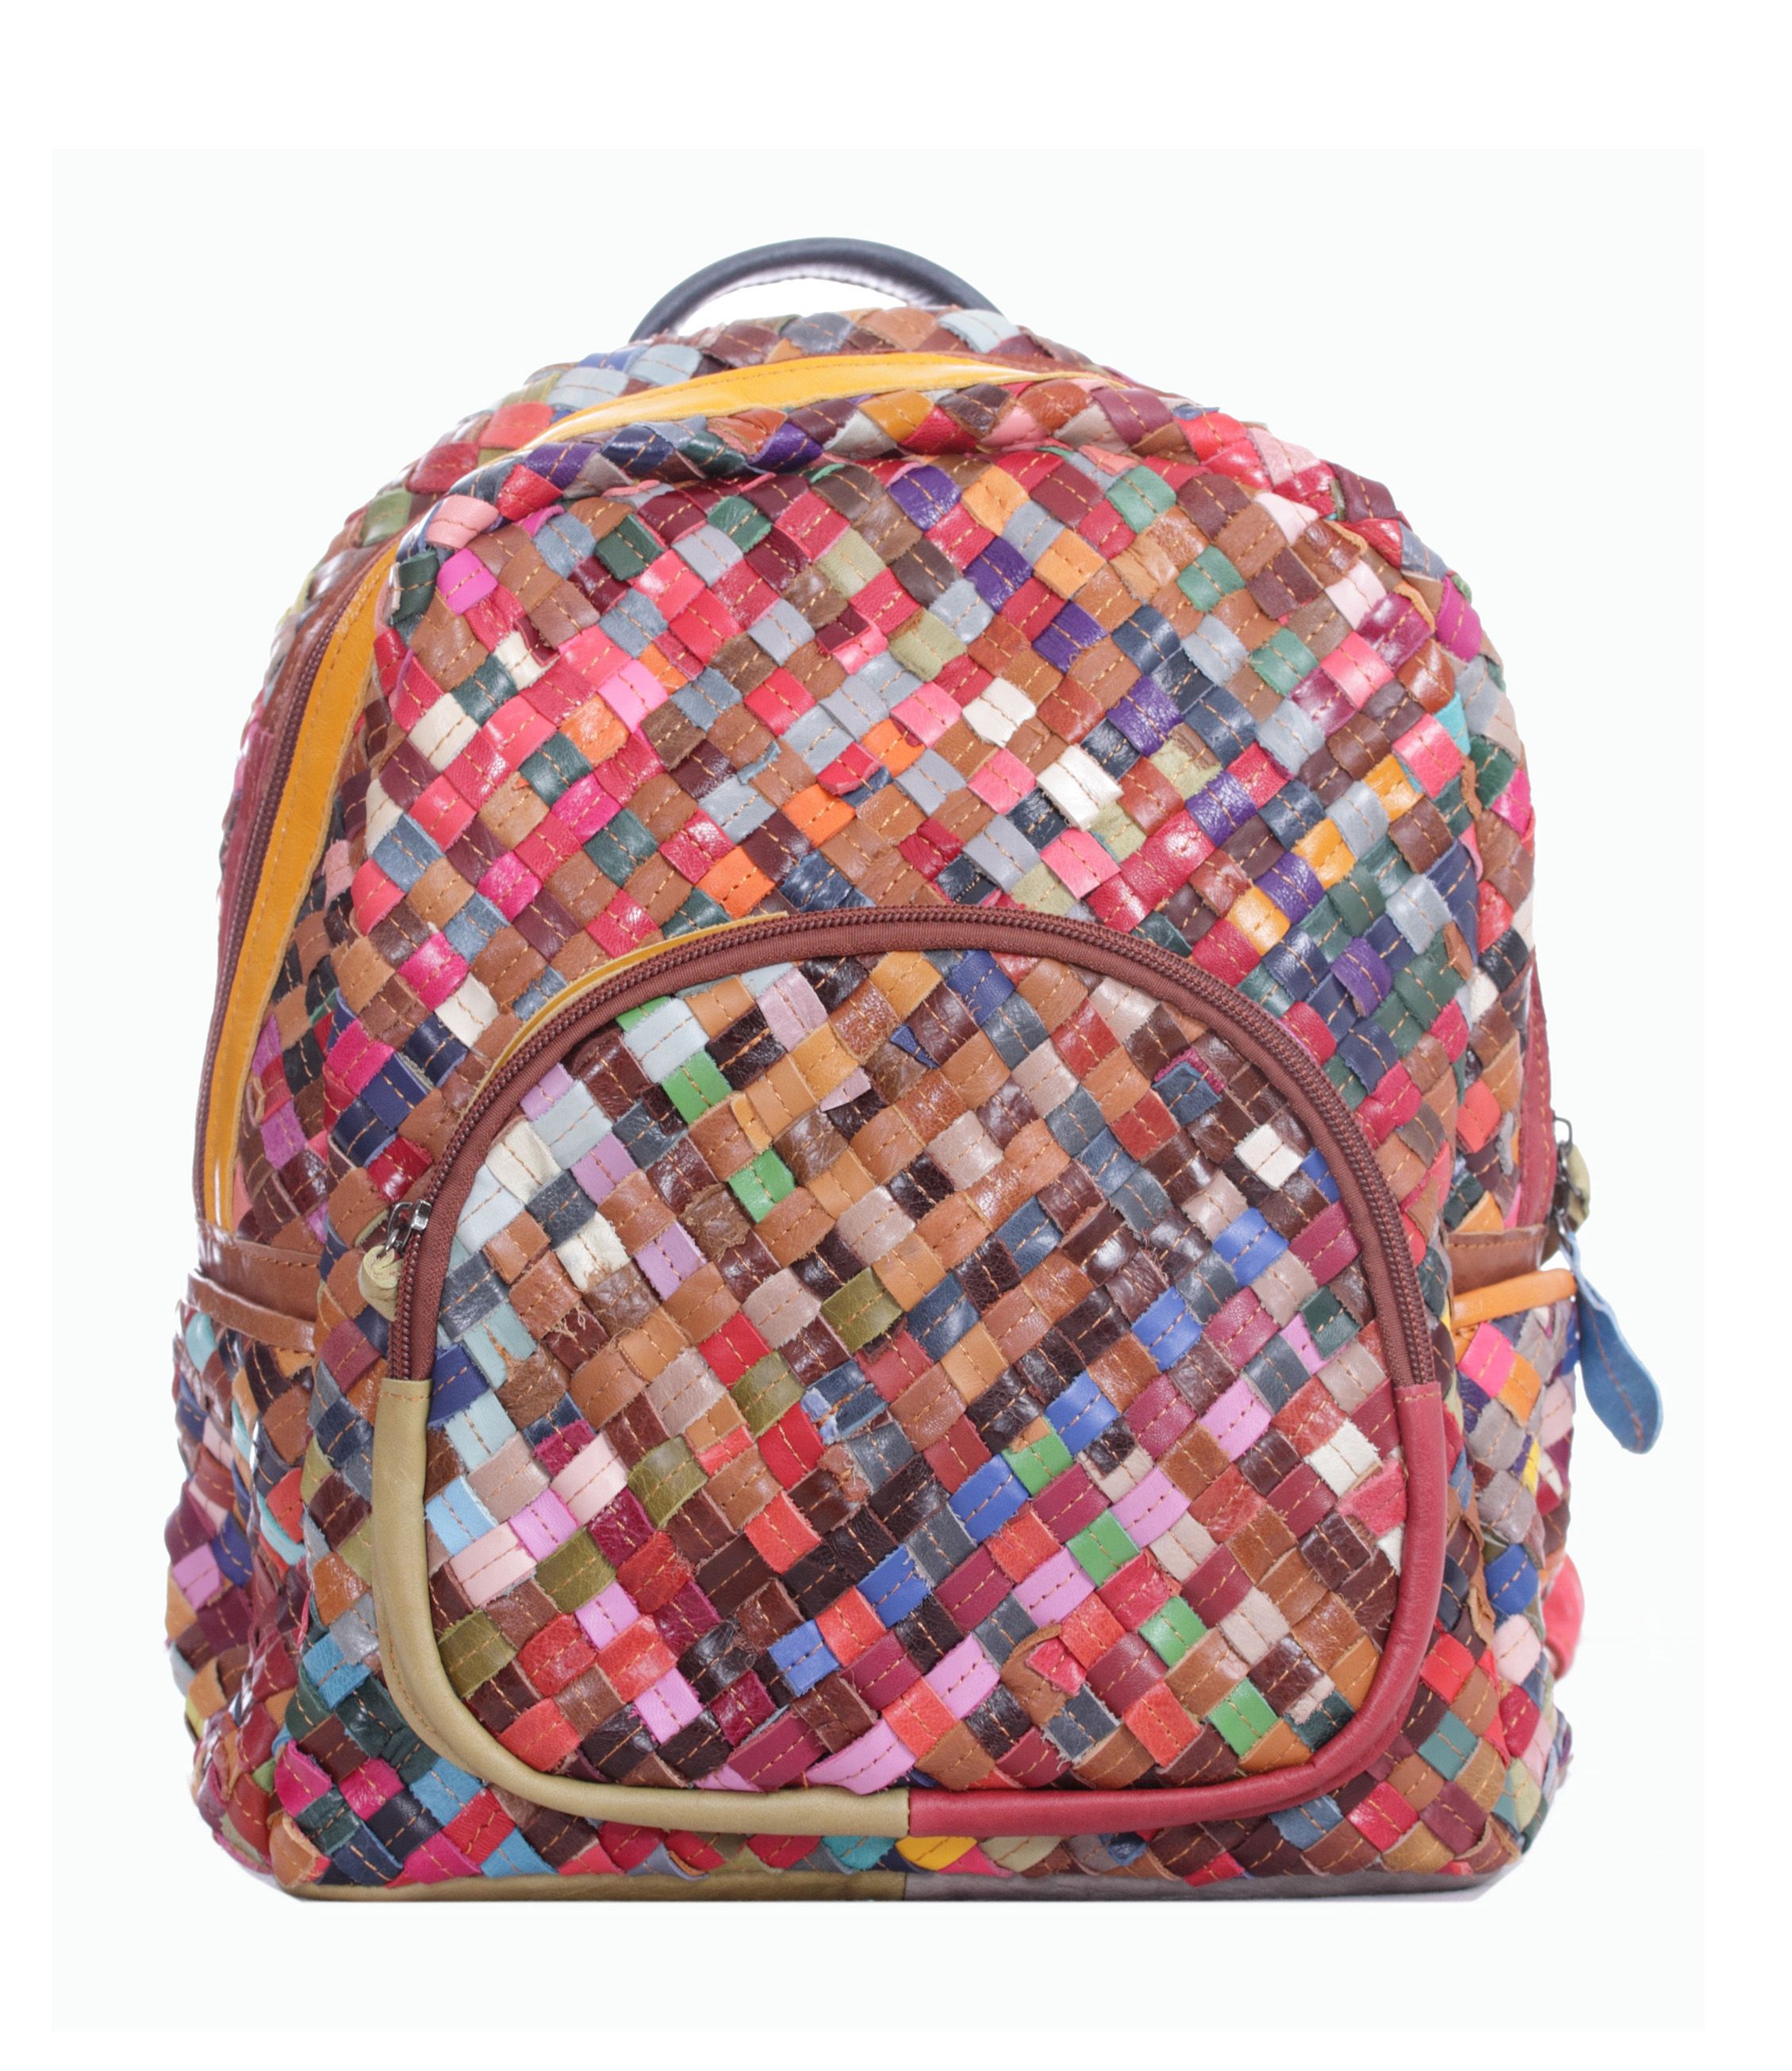 Handmade Woven Multicolour Leather Zip Round Backpack